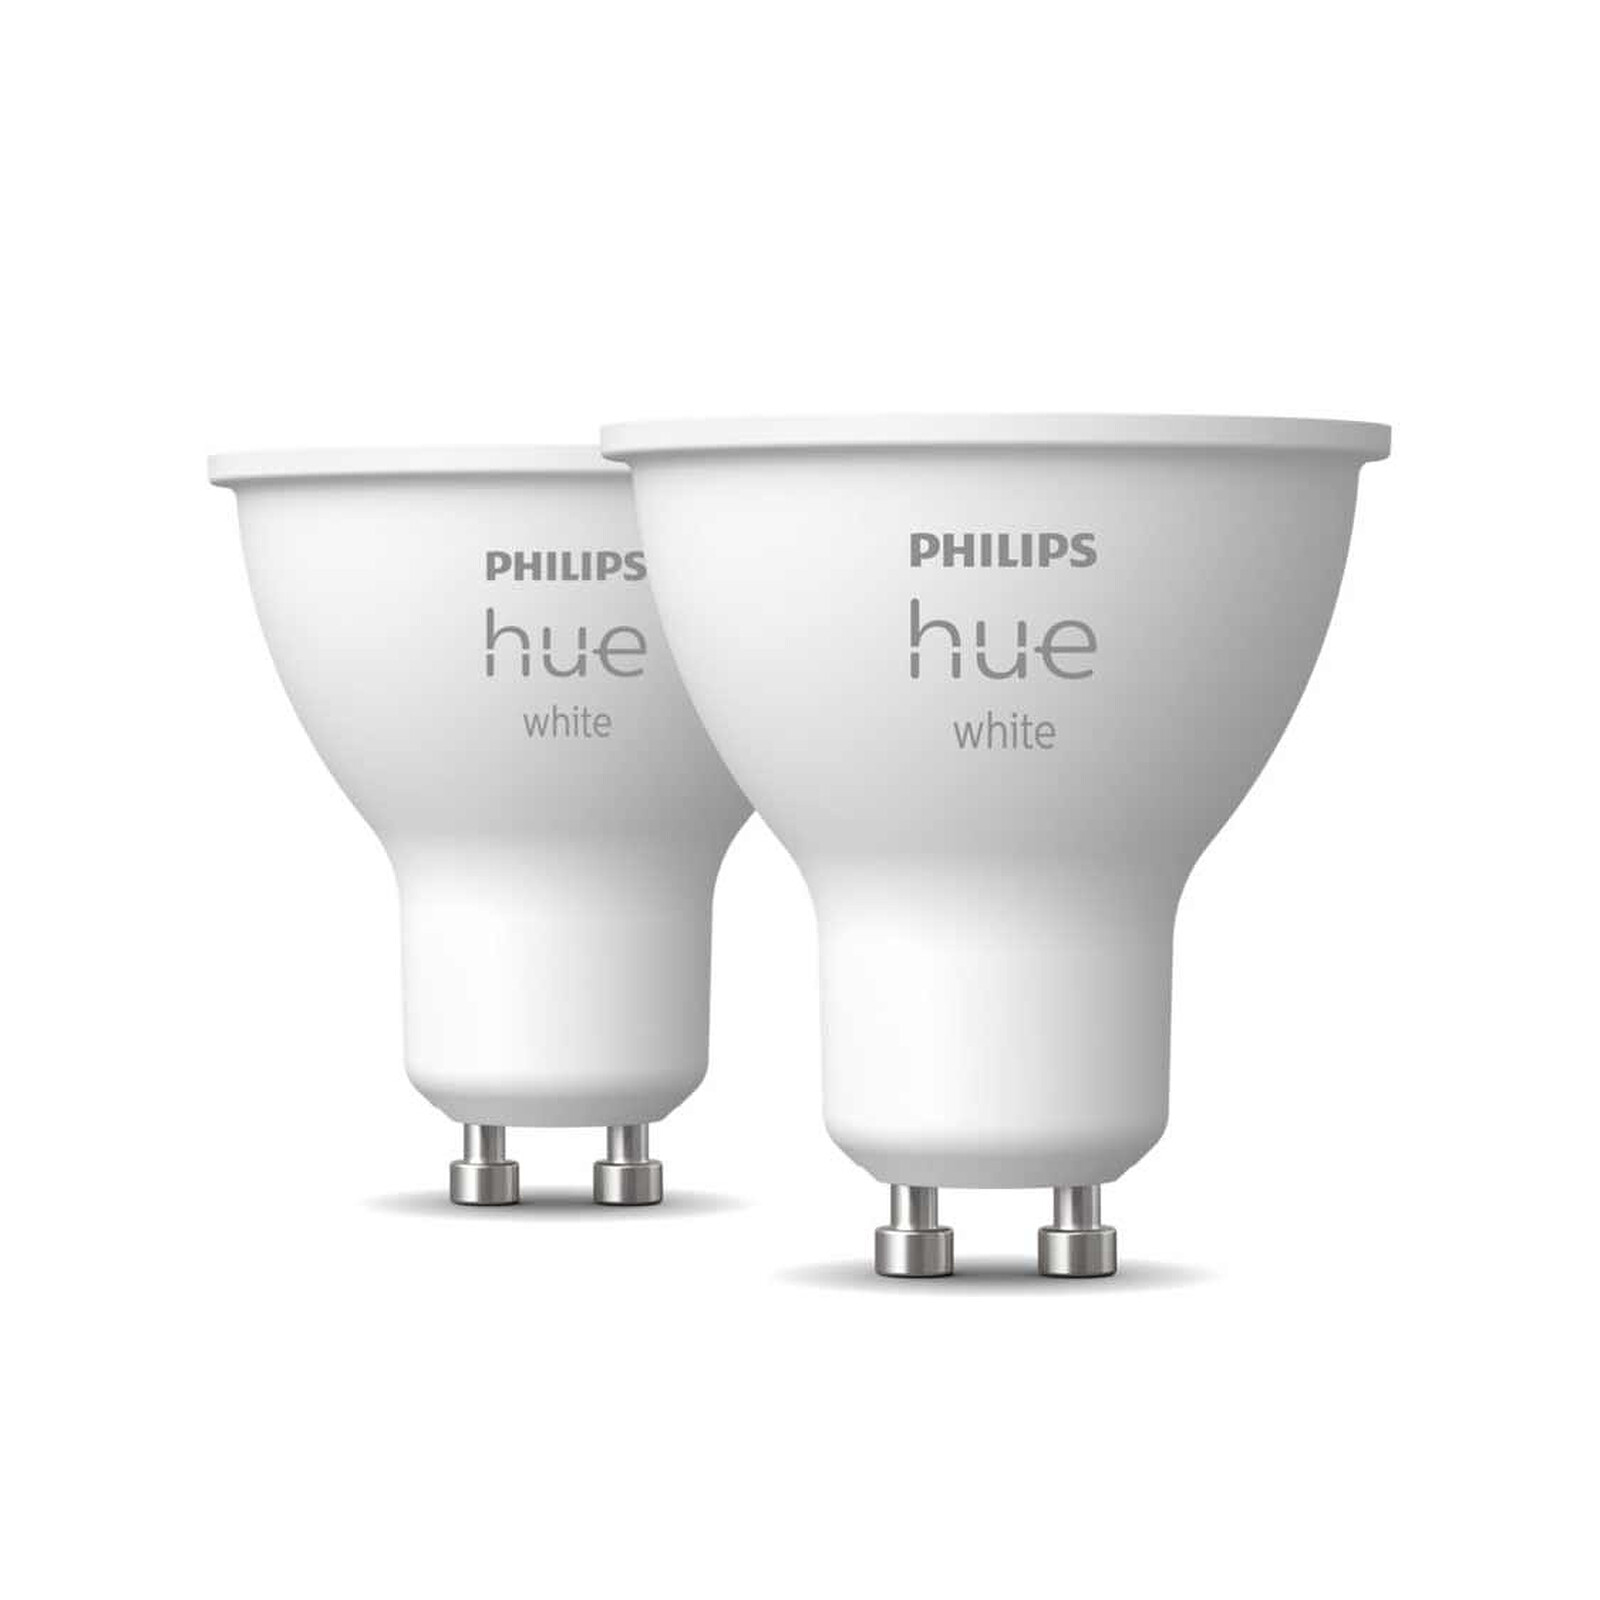 Philips Hue White and Color Ambiance Starter Kit E27 A60 8 W Bluetooth x 3